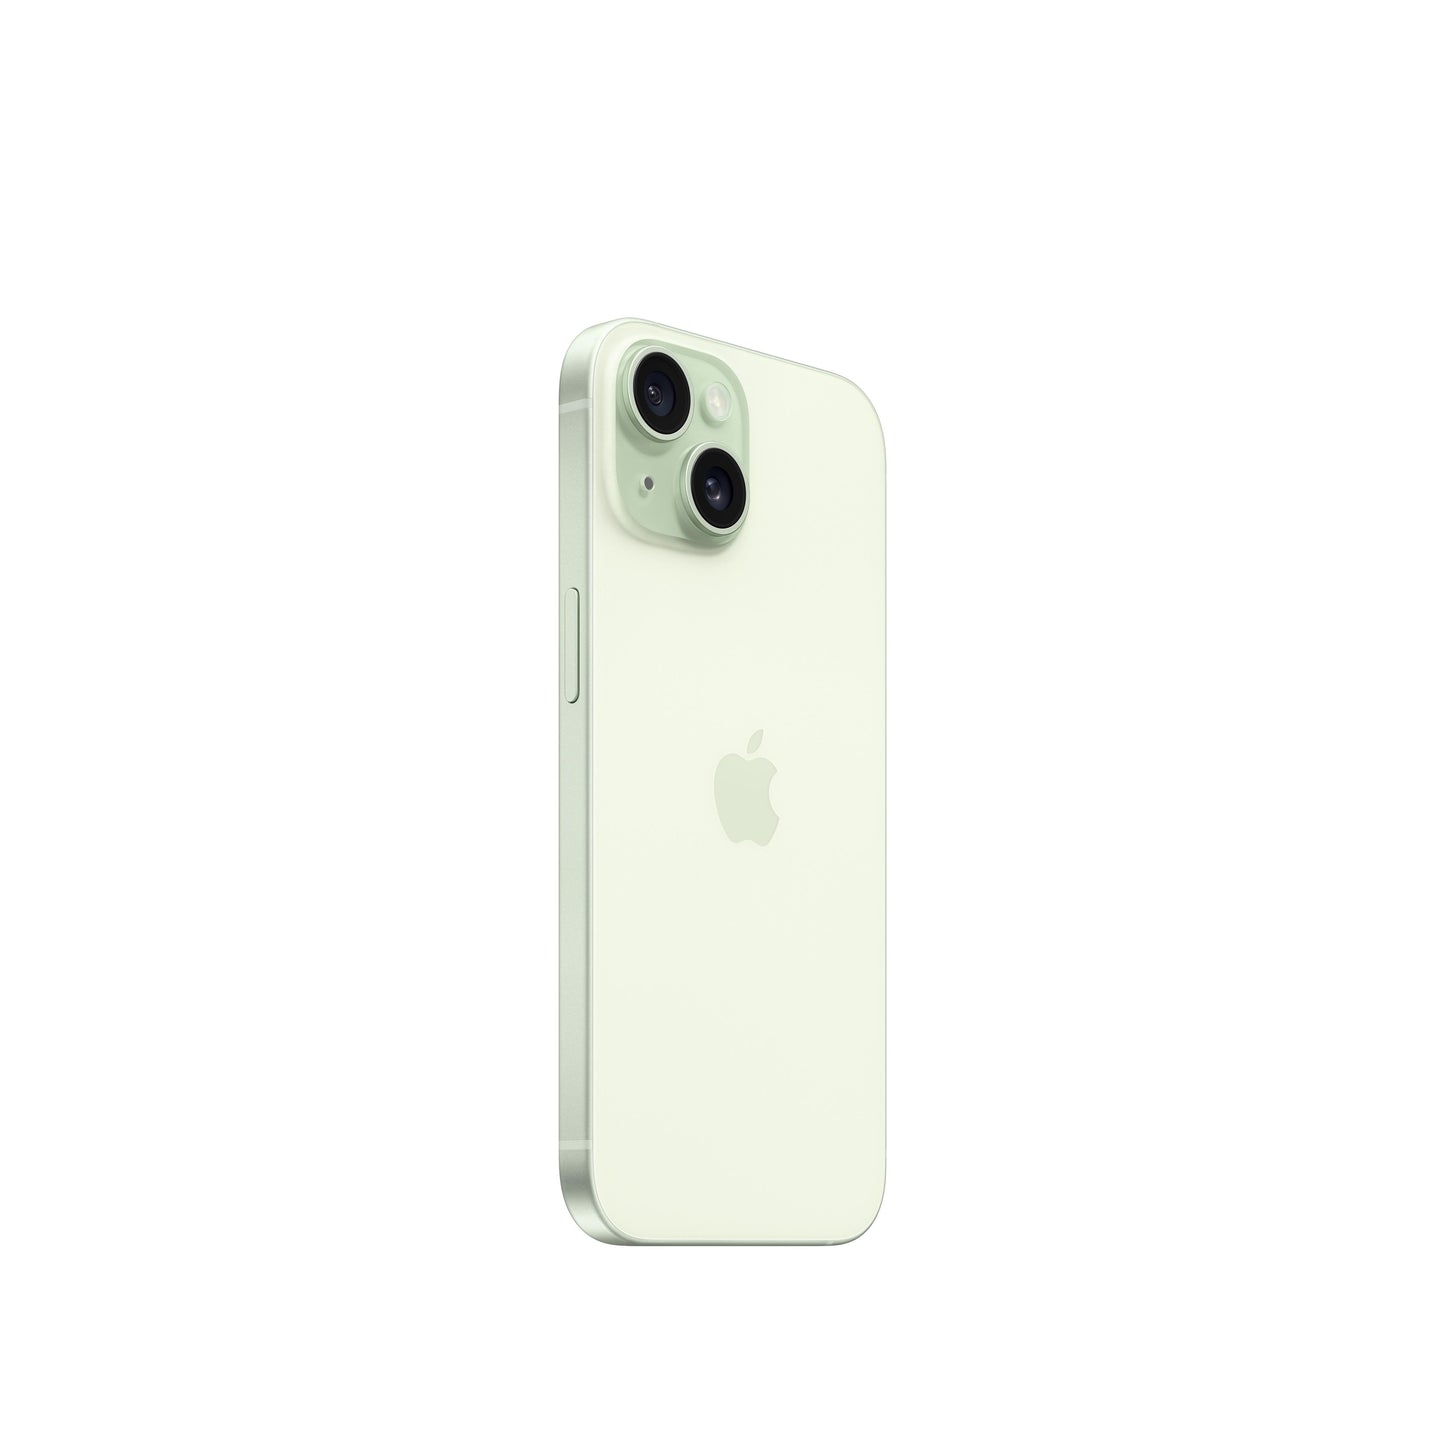 iPhone 15 in Green, 256GB Storage. EMI available |Get best offers for iphone 15 [variant] Green 256GB.